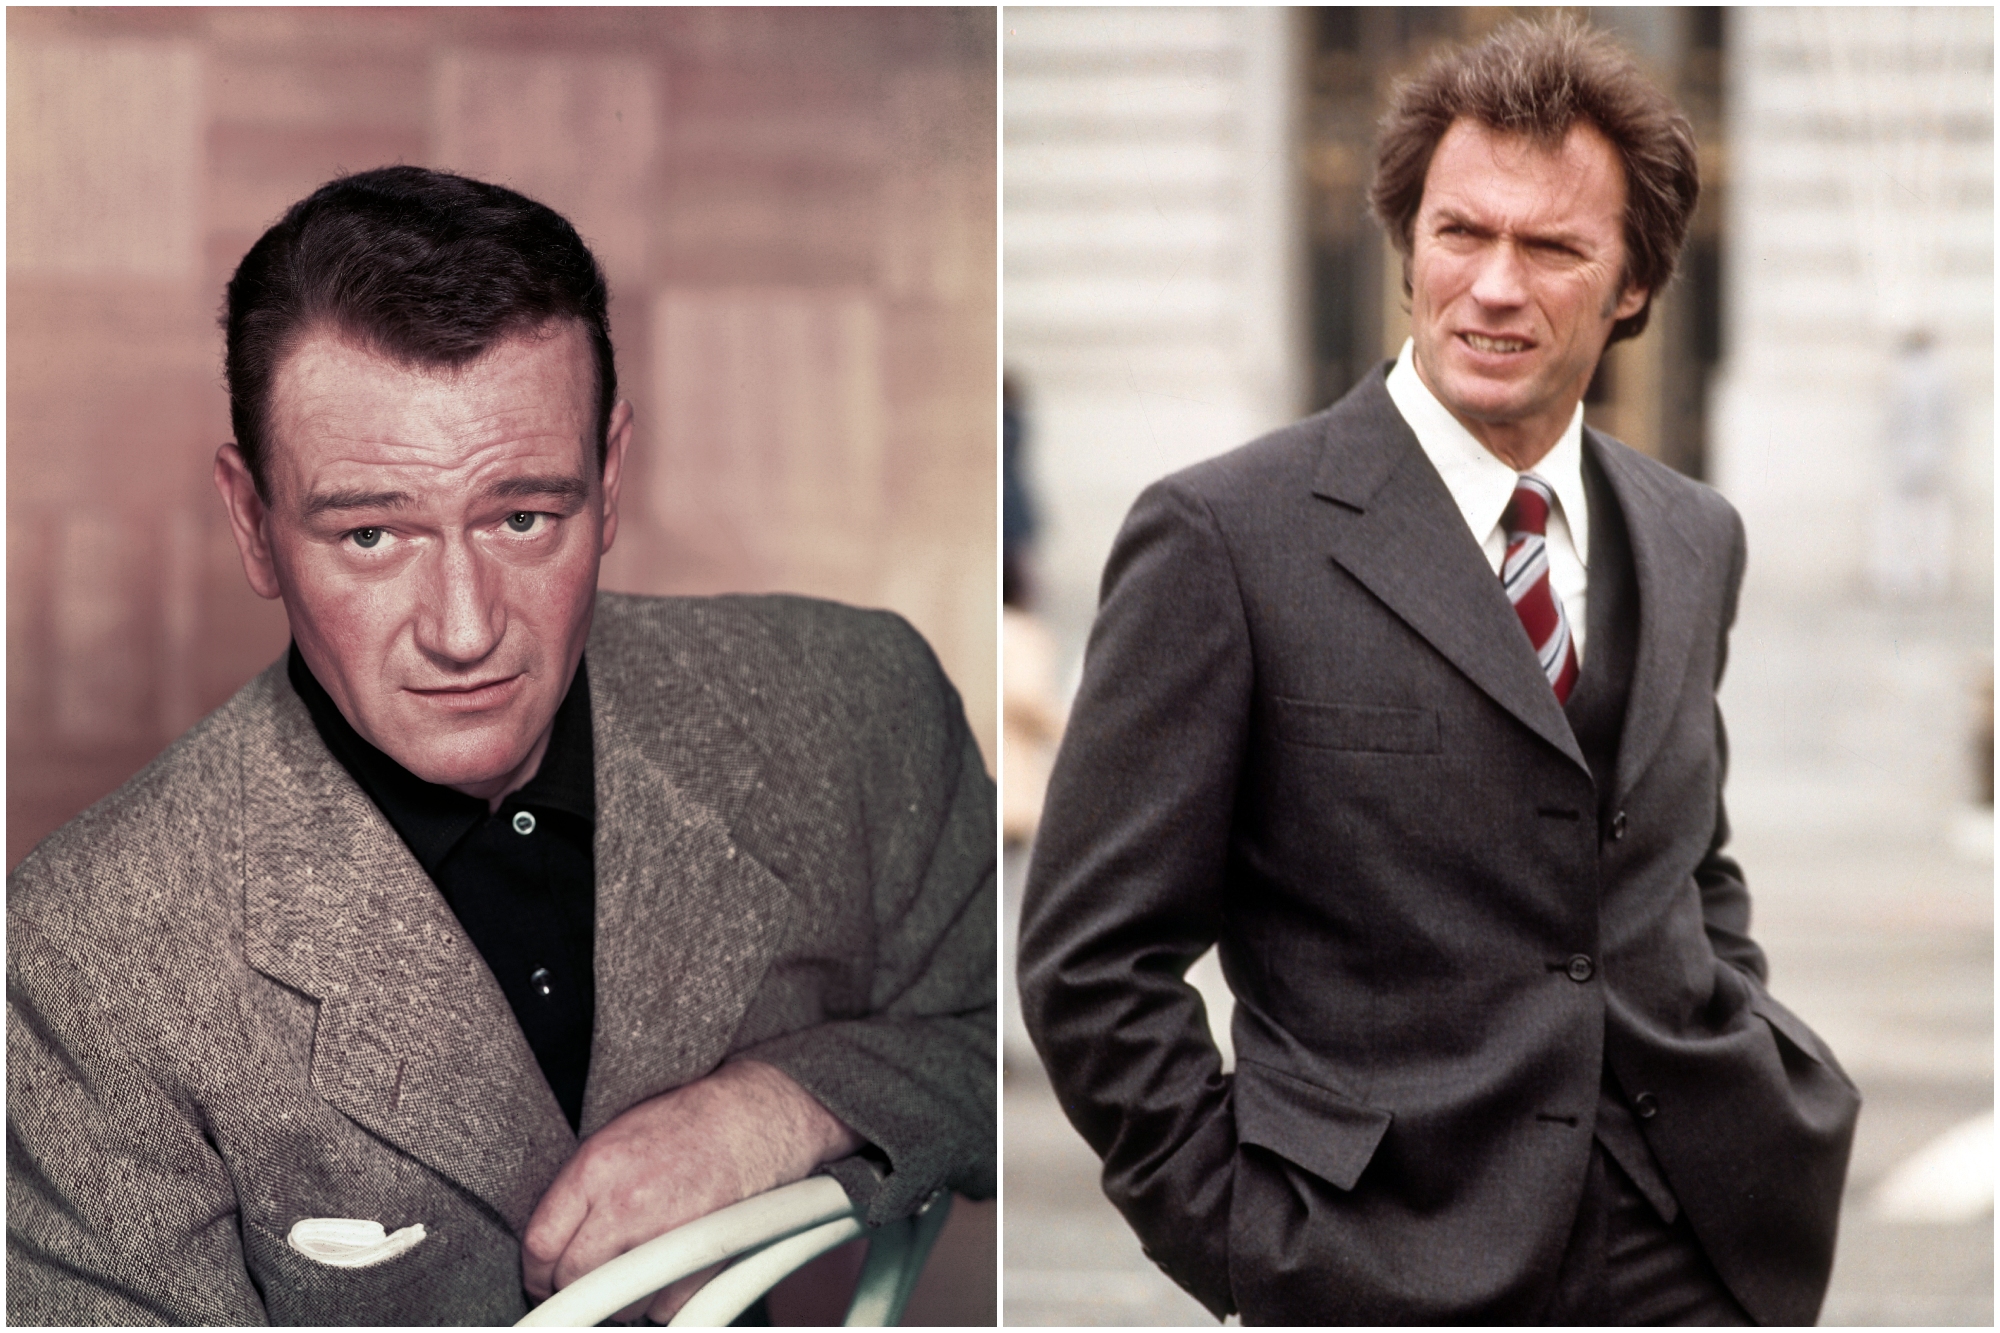 John Wayne and Clint Eastwood. Wayne is posing in a chair wearing a coat. Eastwood is wearing a suit and tie from 'Dirty Harry'